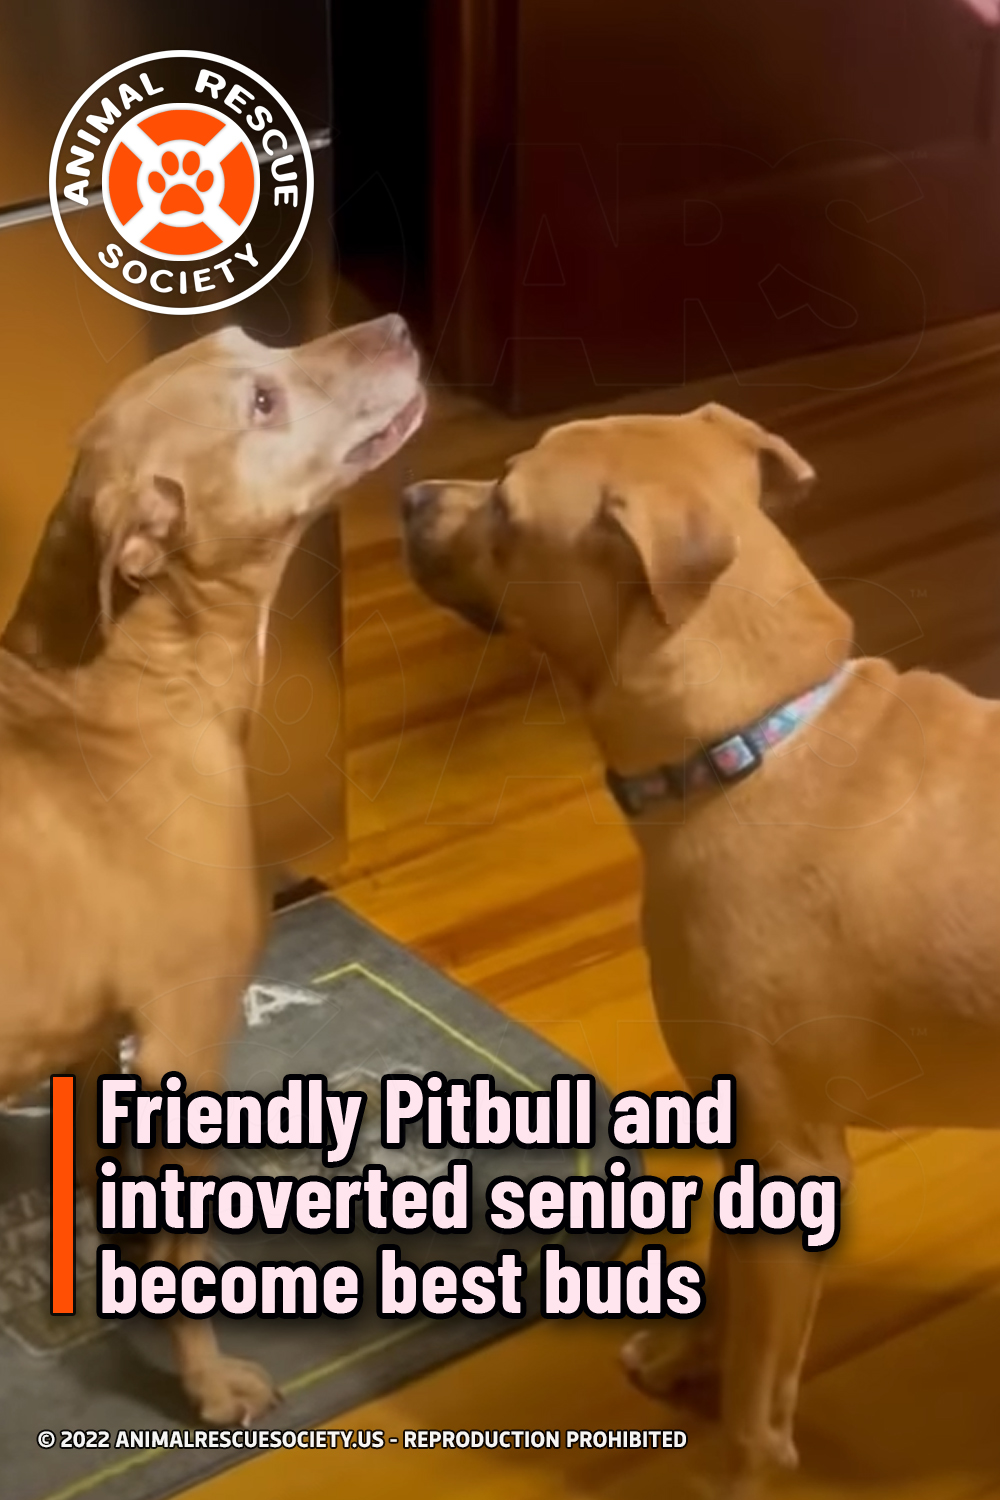 Friendly Pitbull and introverted senior dog become best buds